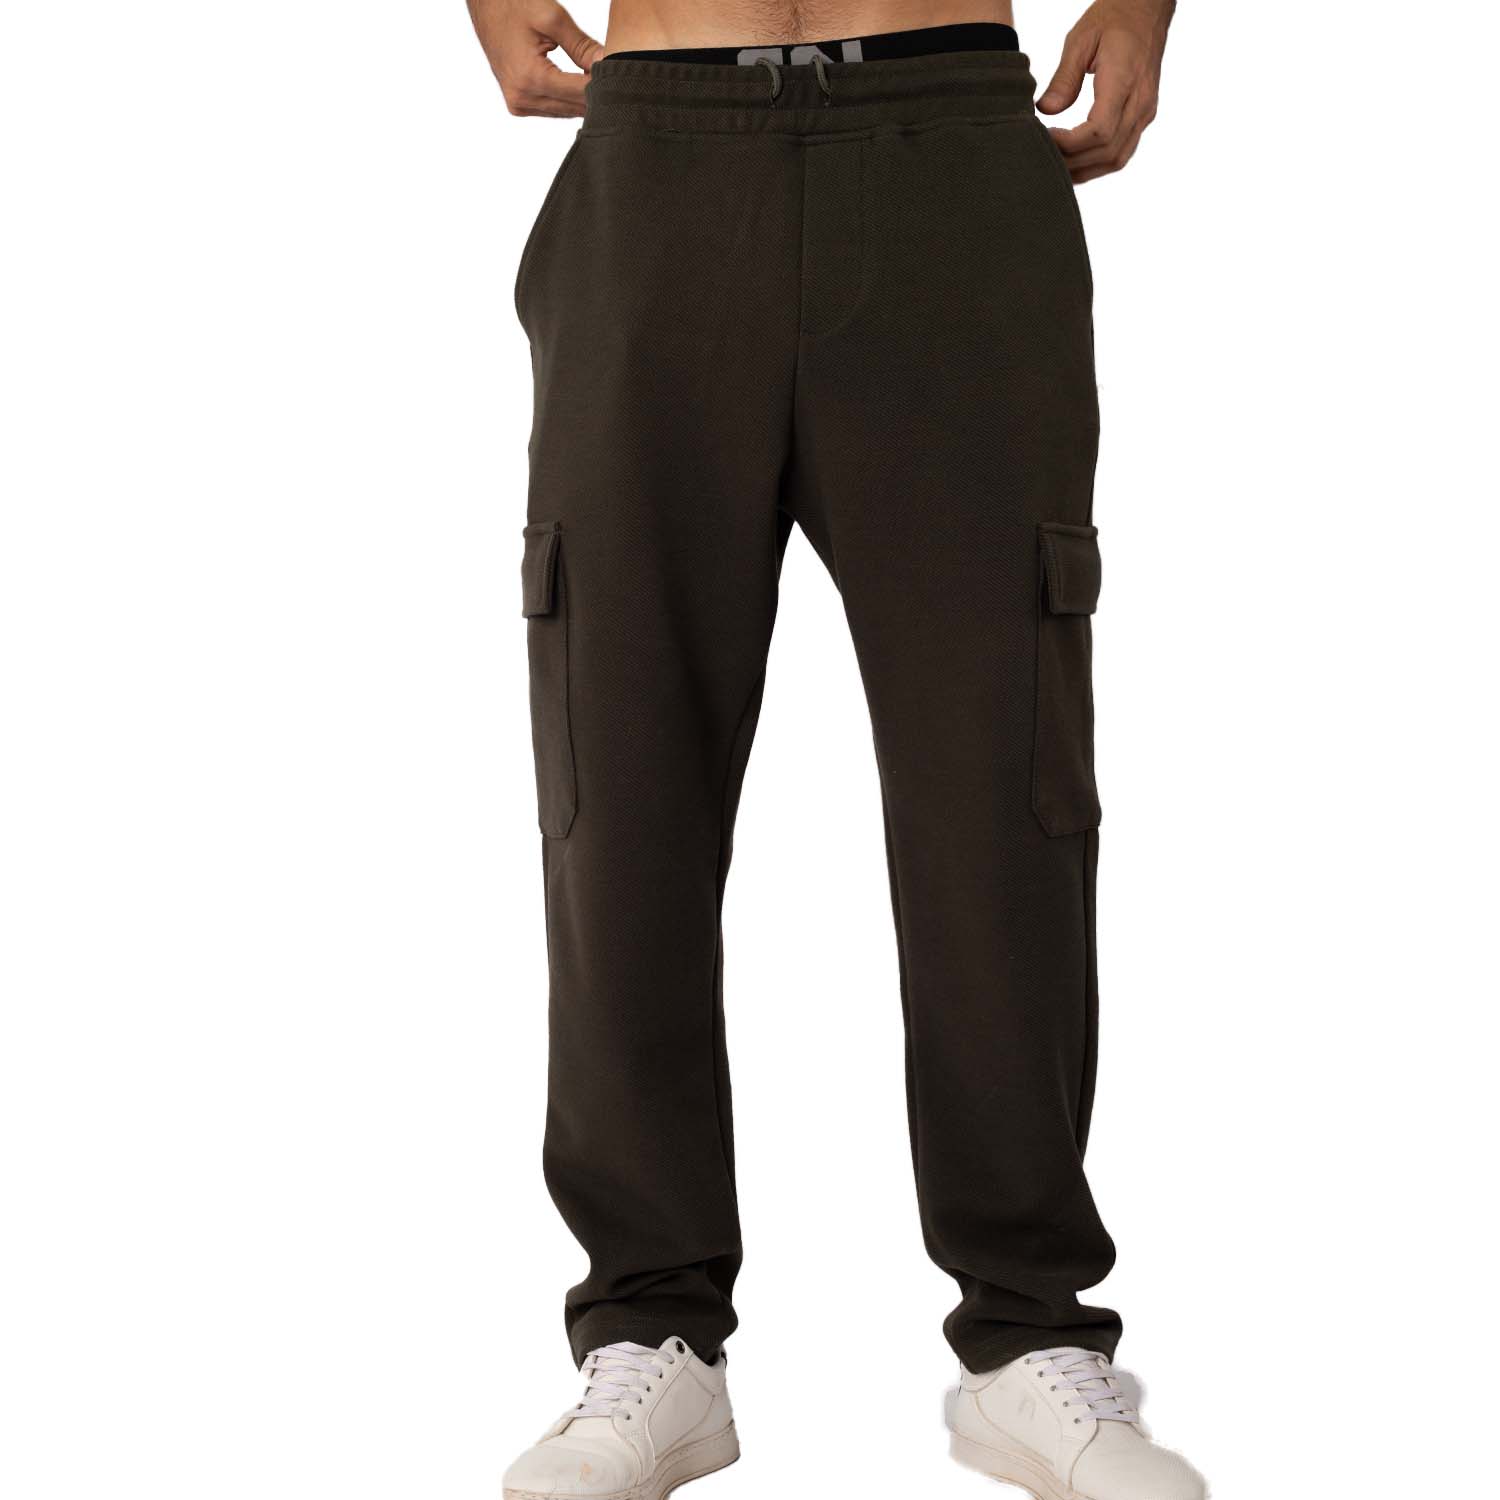 M23NT913- BASIC JOGGERS RELAXED FIT